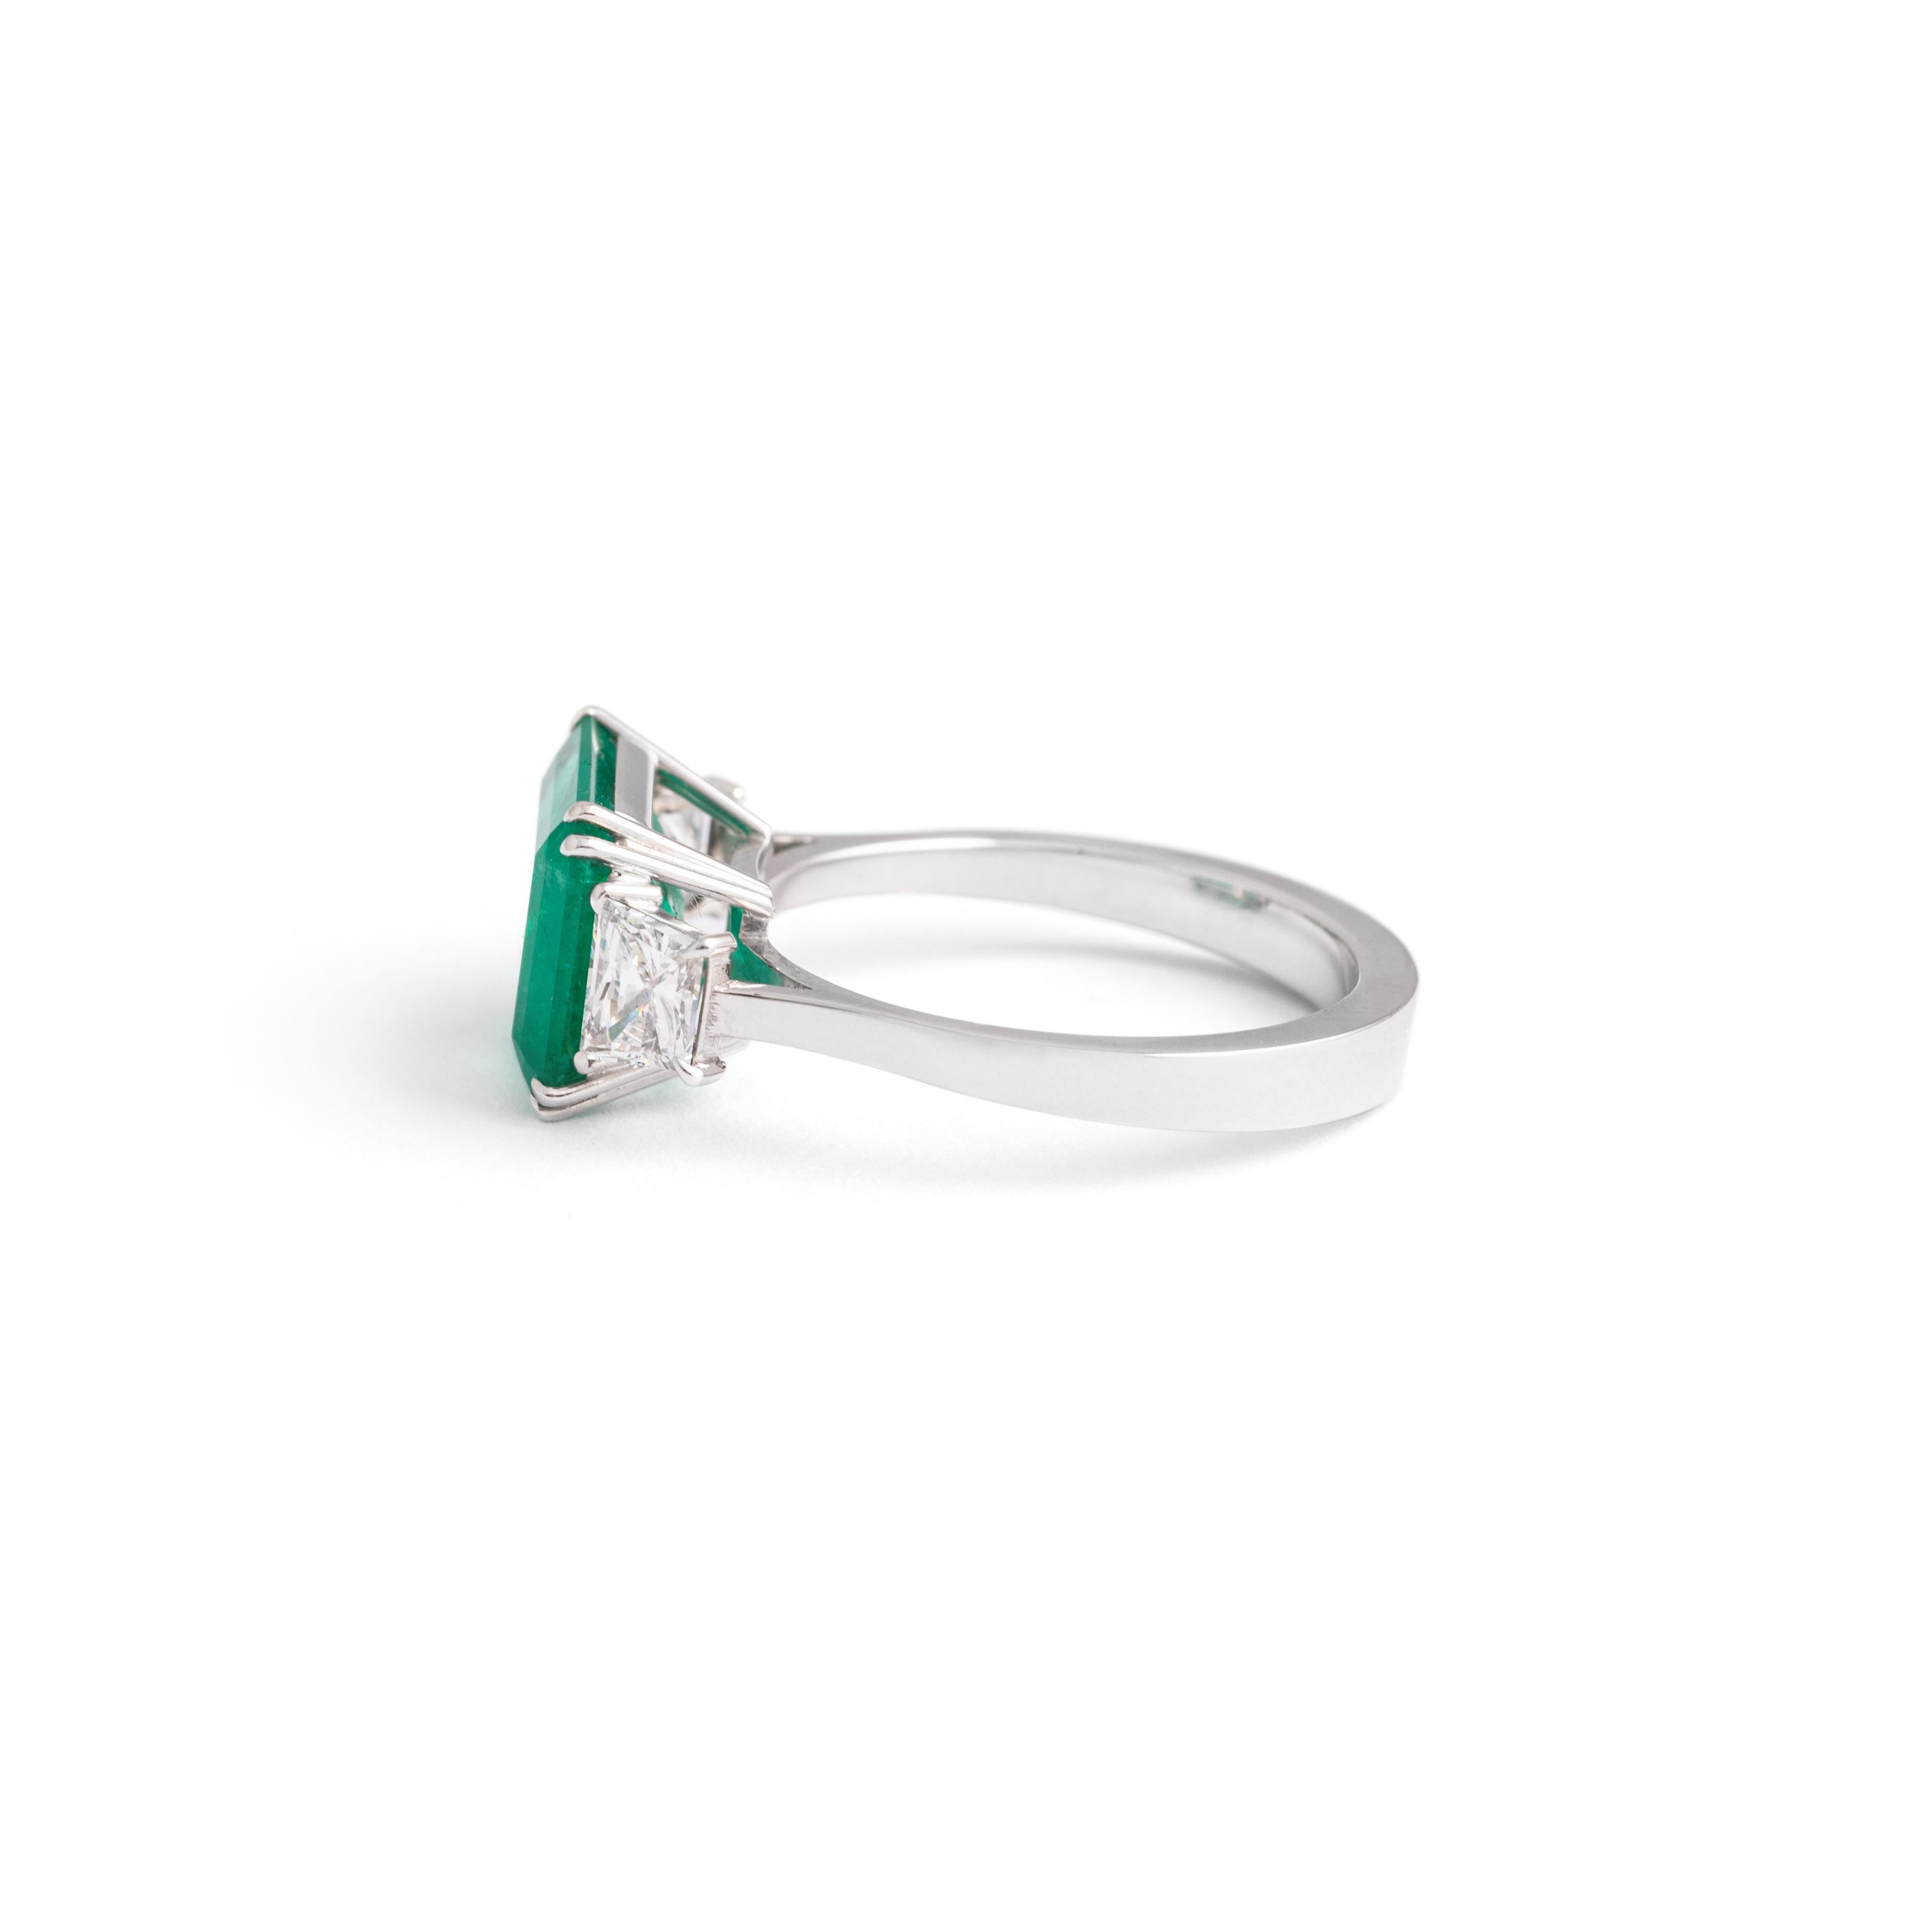 Emerald Cut 3.25 Carat Colombian Emerald Ring For Sale